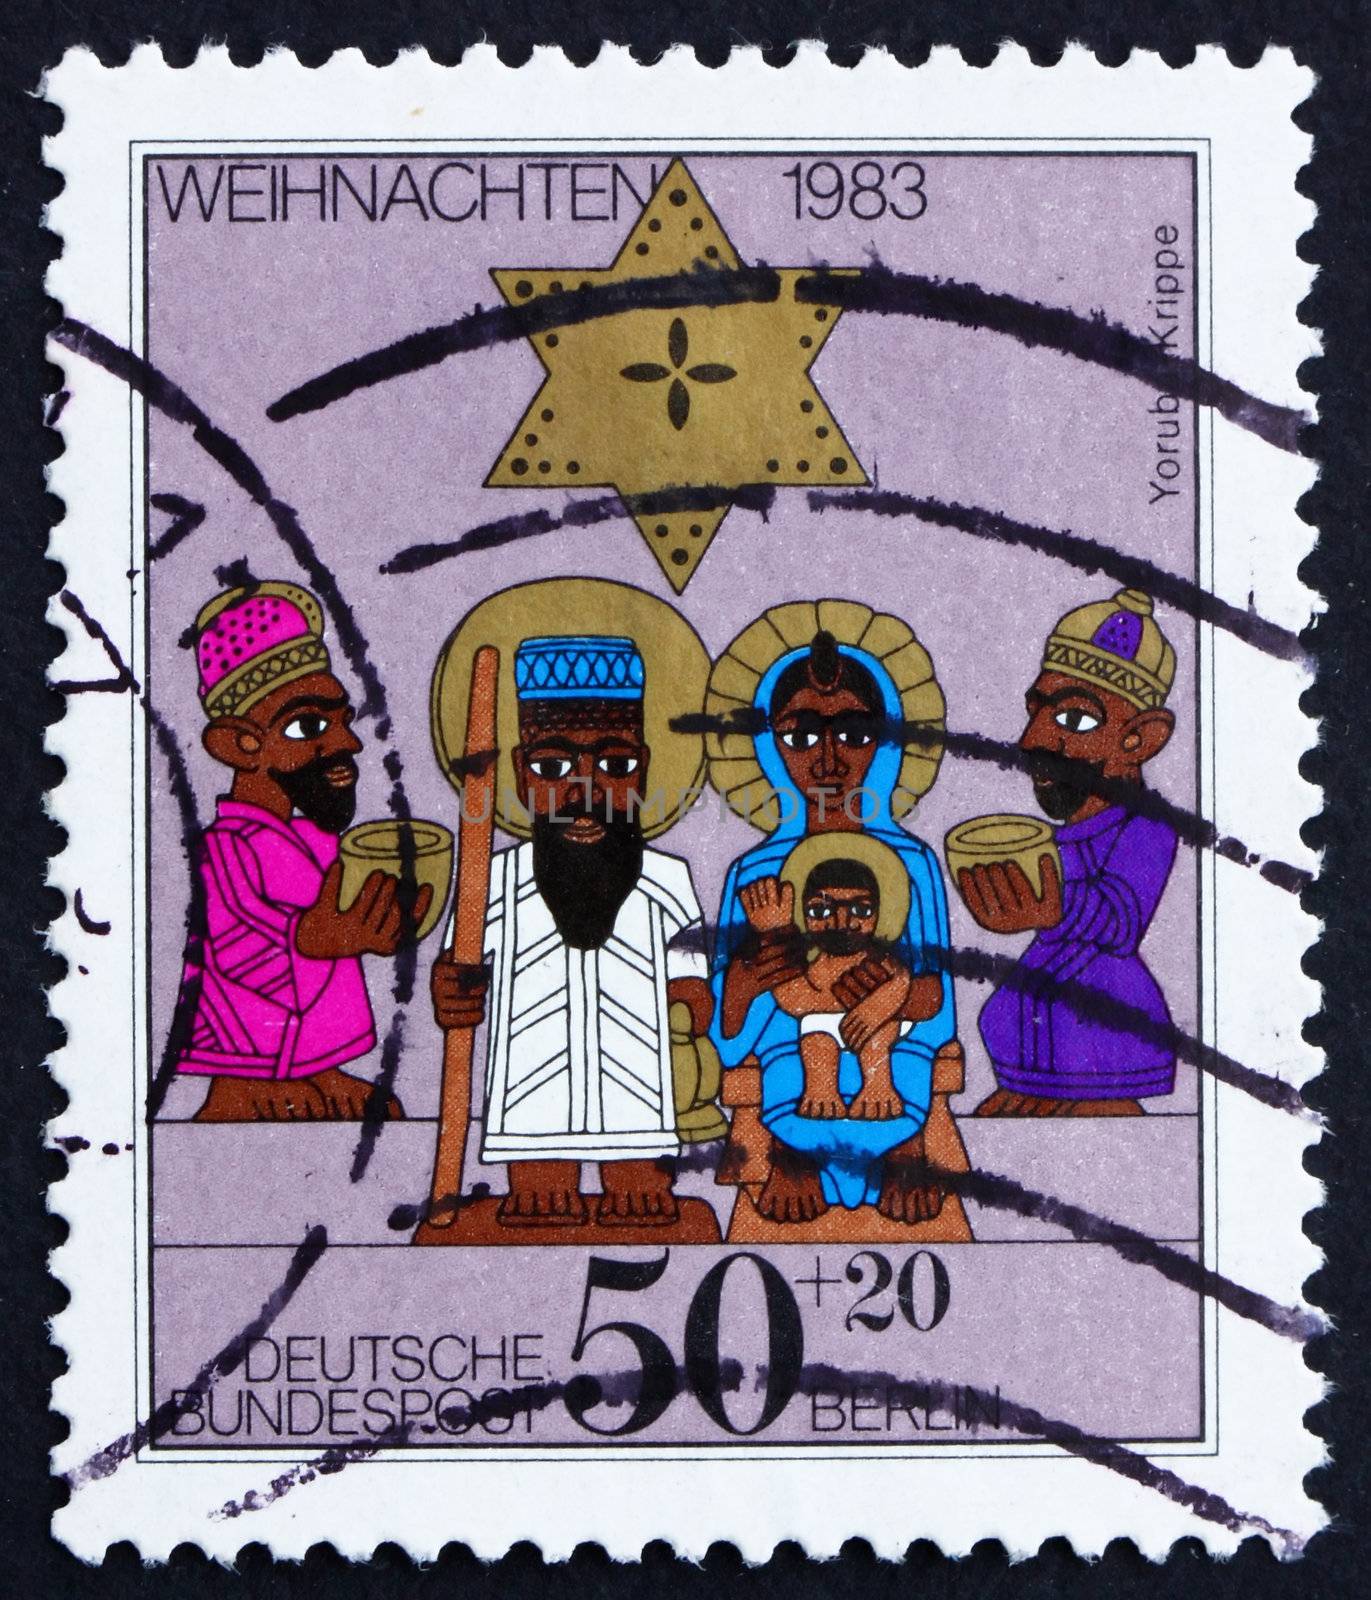 GERMANY - CIRCA 1983: a stamp printed in the Germany, Berlin shows Nativity, Christmas, circa 1983